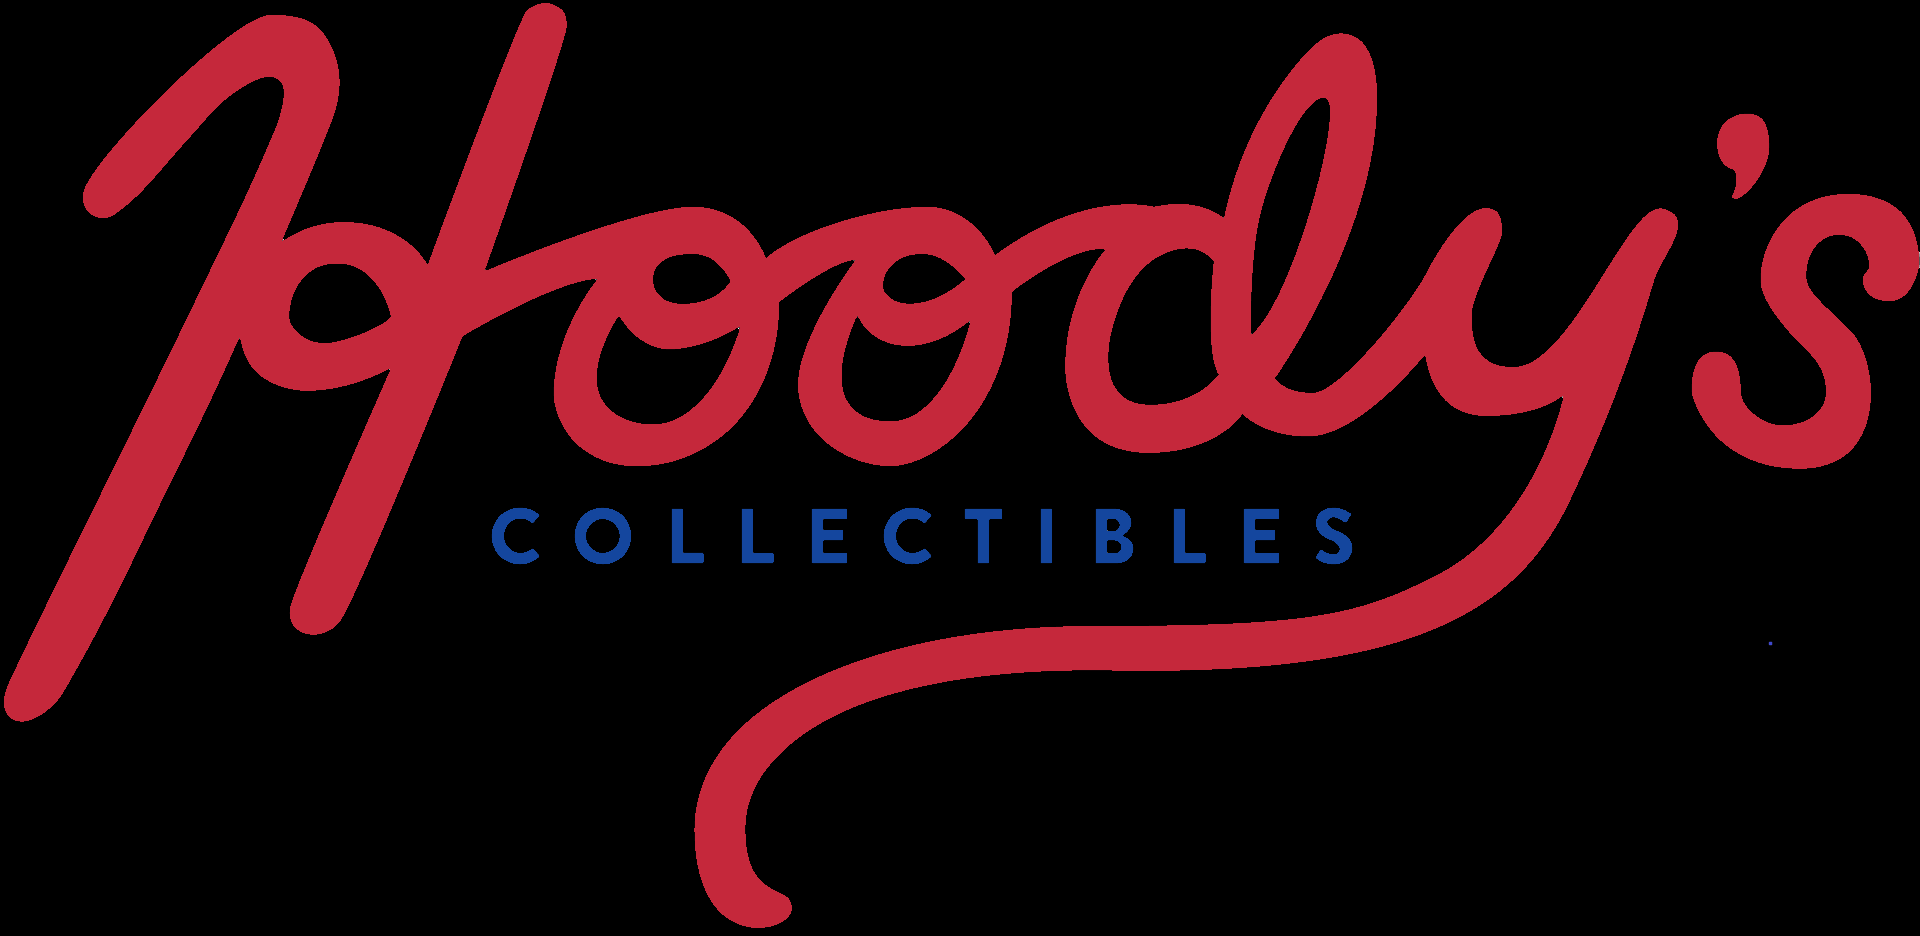 Hoody's Collectibles